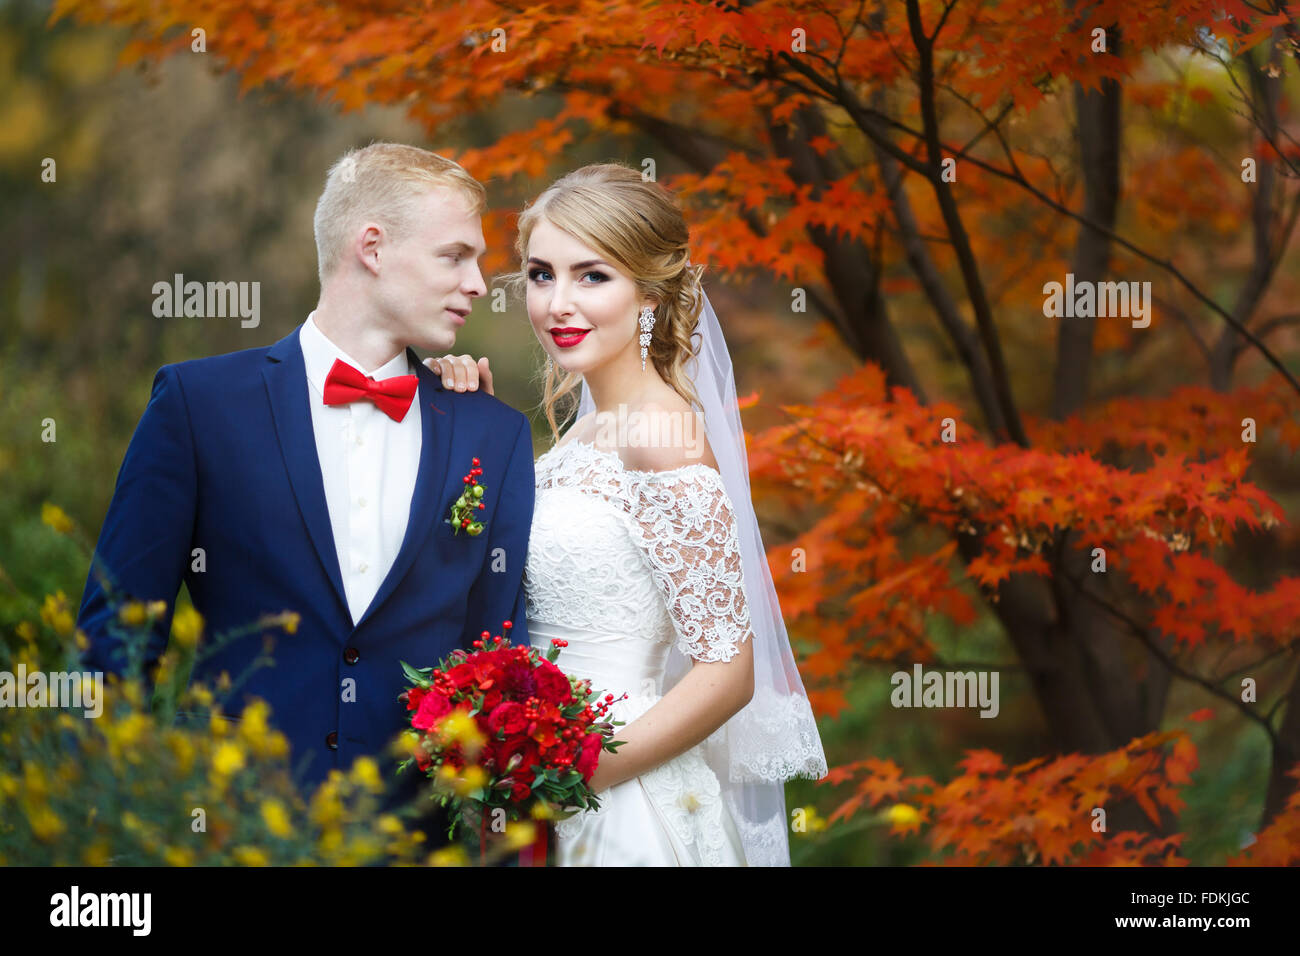 Portrait of the wedding couple in autumn forest Stock Photo